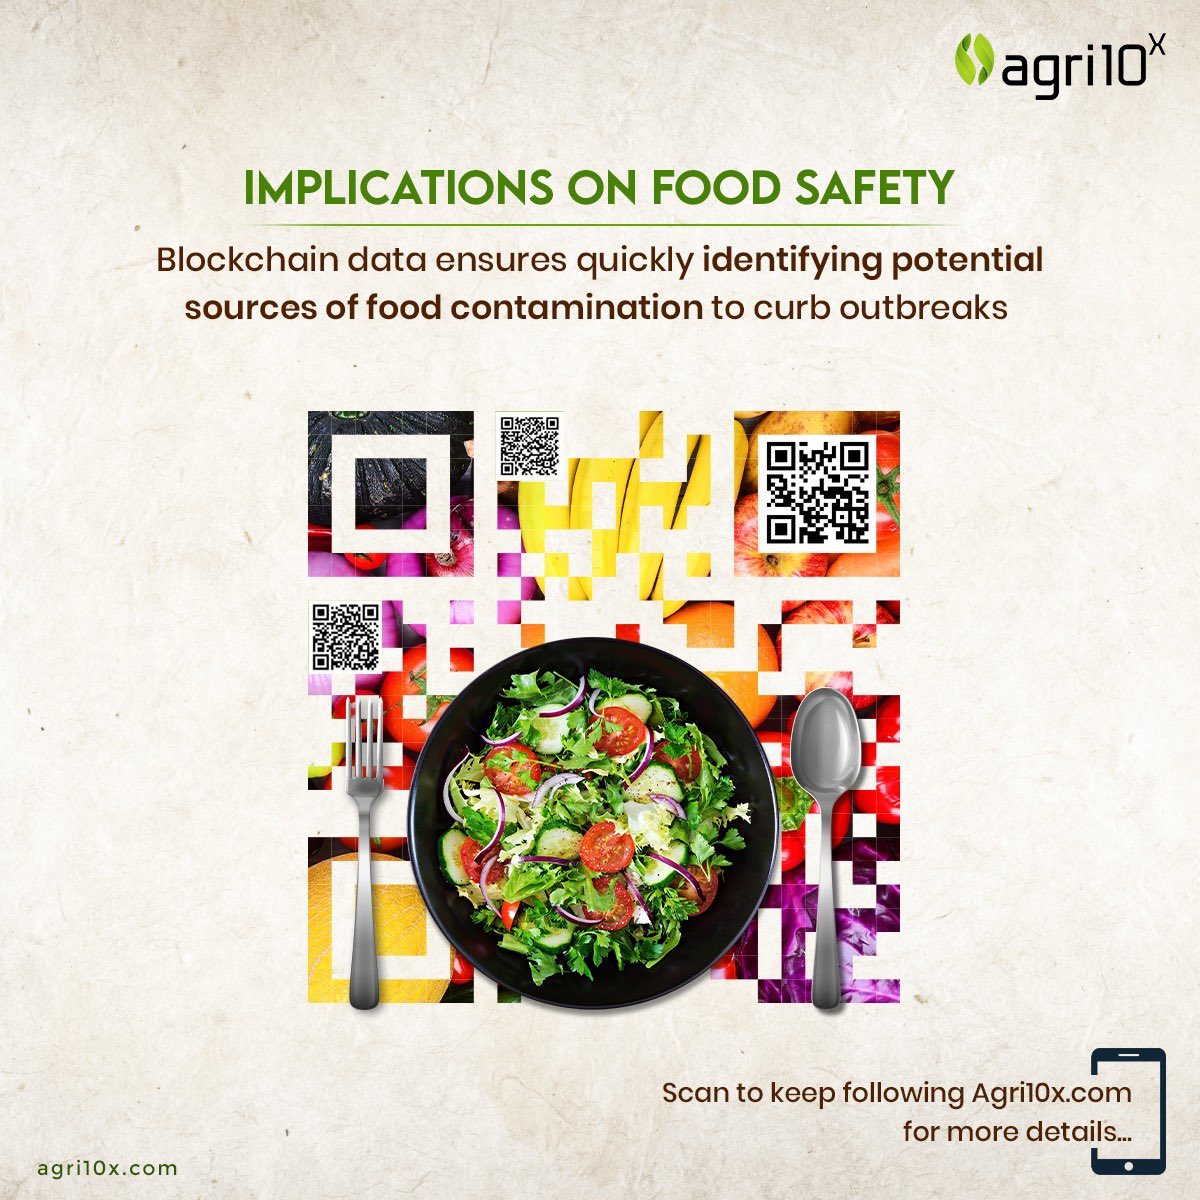 Blockchain data ensures quickly identifying potential sources of food contamination within seconds to curb any further outbreaks, amplifying food safety. #BlockchaininAgriculture #AgriTech #Agri10x